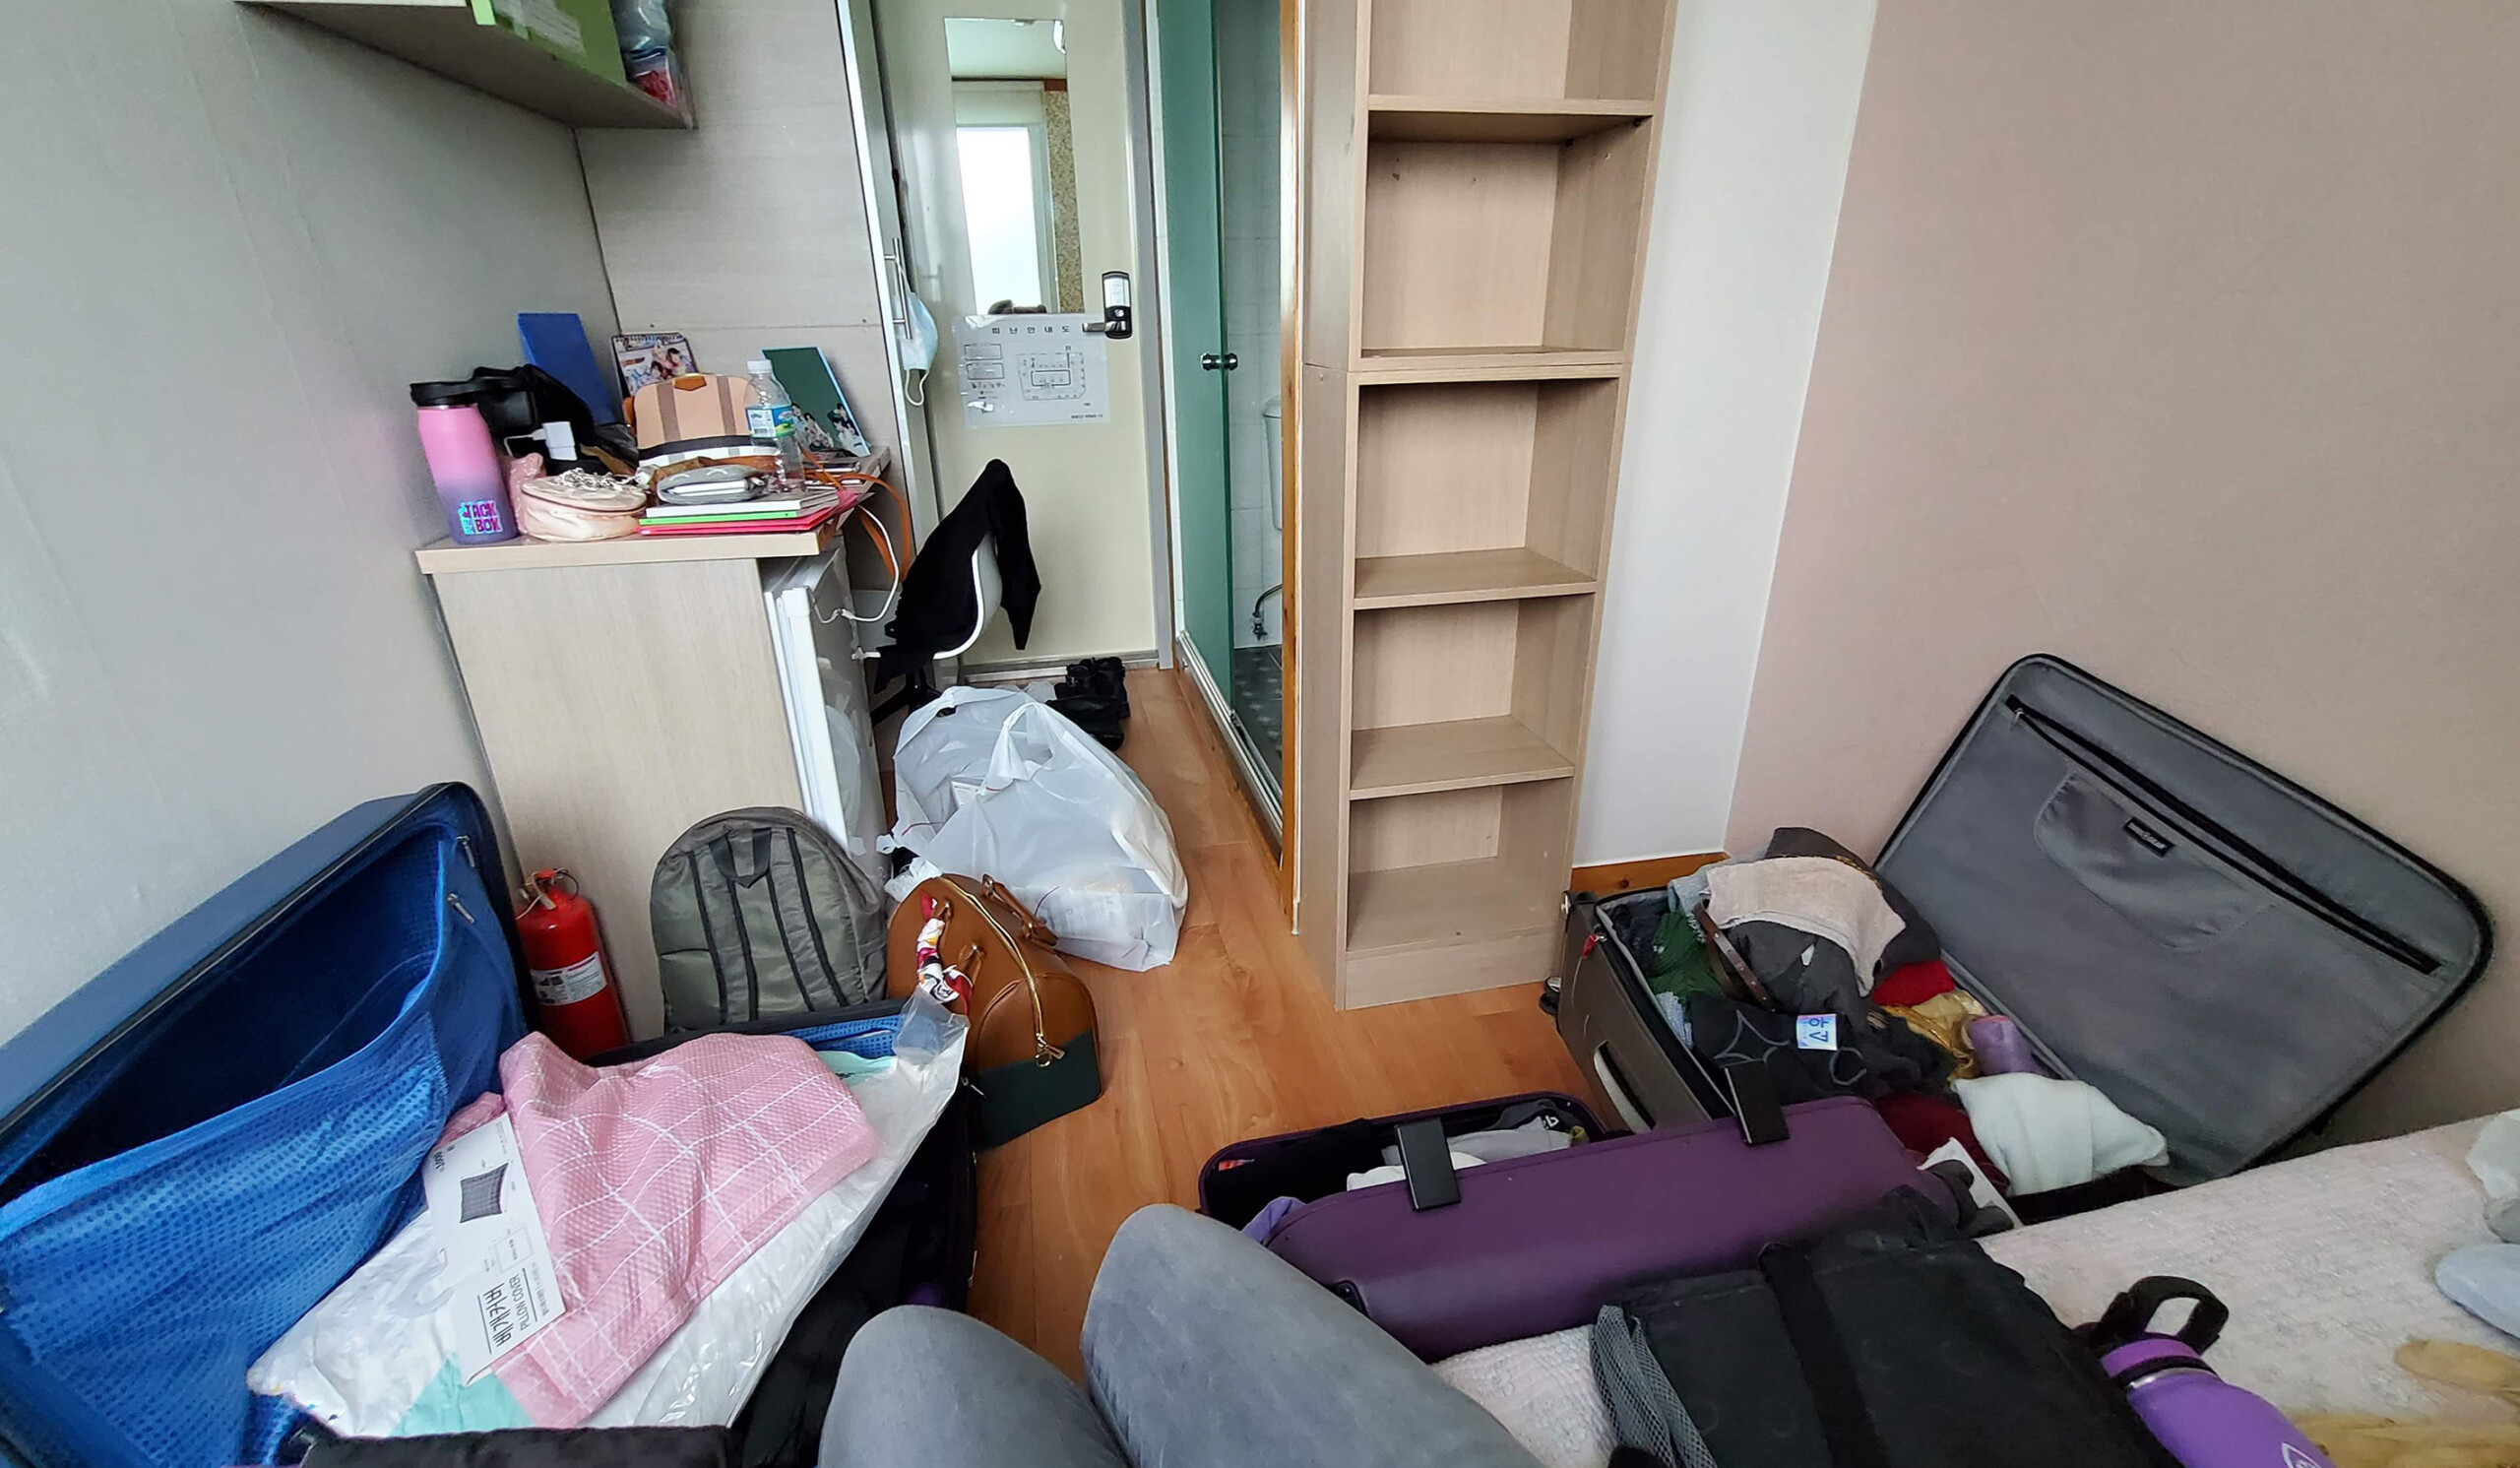 A picture of a goshiwon room with a twin sized bed, a large window, a private bathroom, cabinets, a closet, desk, mini fridge, and shelves.